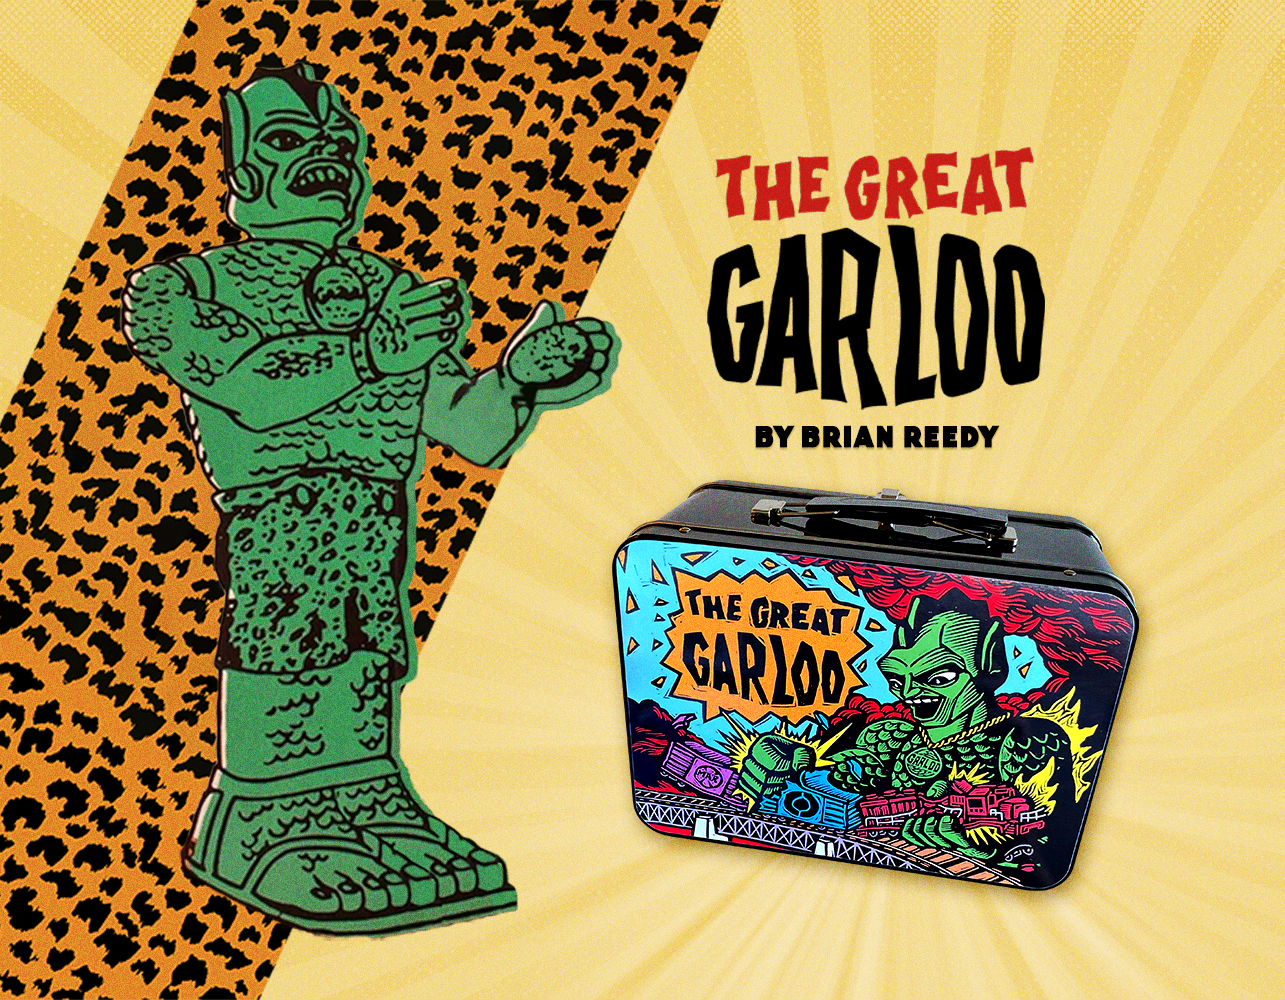 The Great Garloo original green drawing appears next to a black metal lunch box with The Great Garloo on the front of the lunch box.